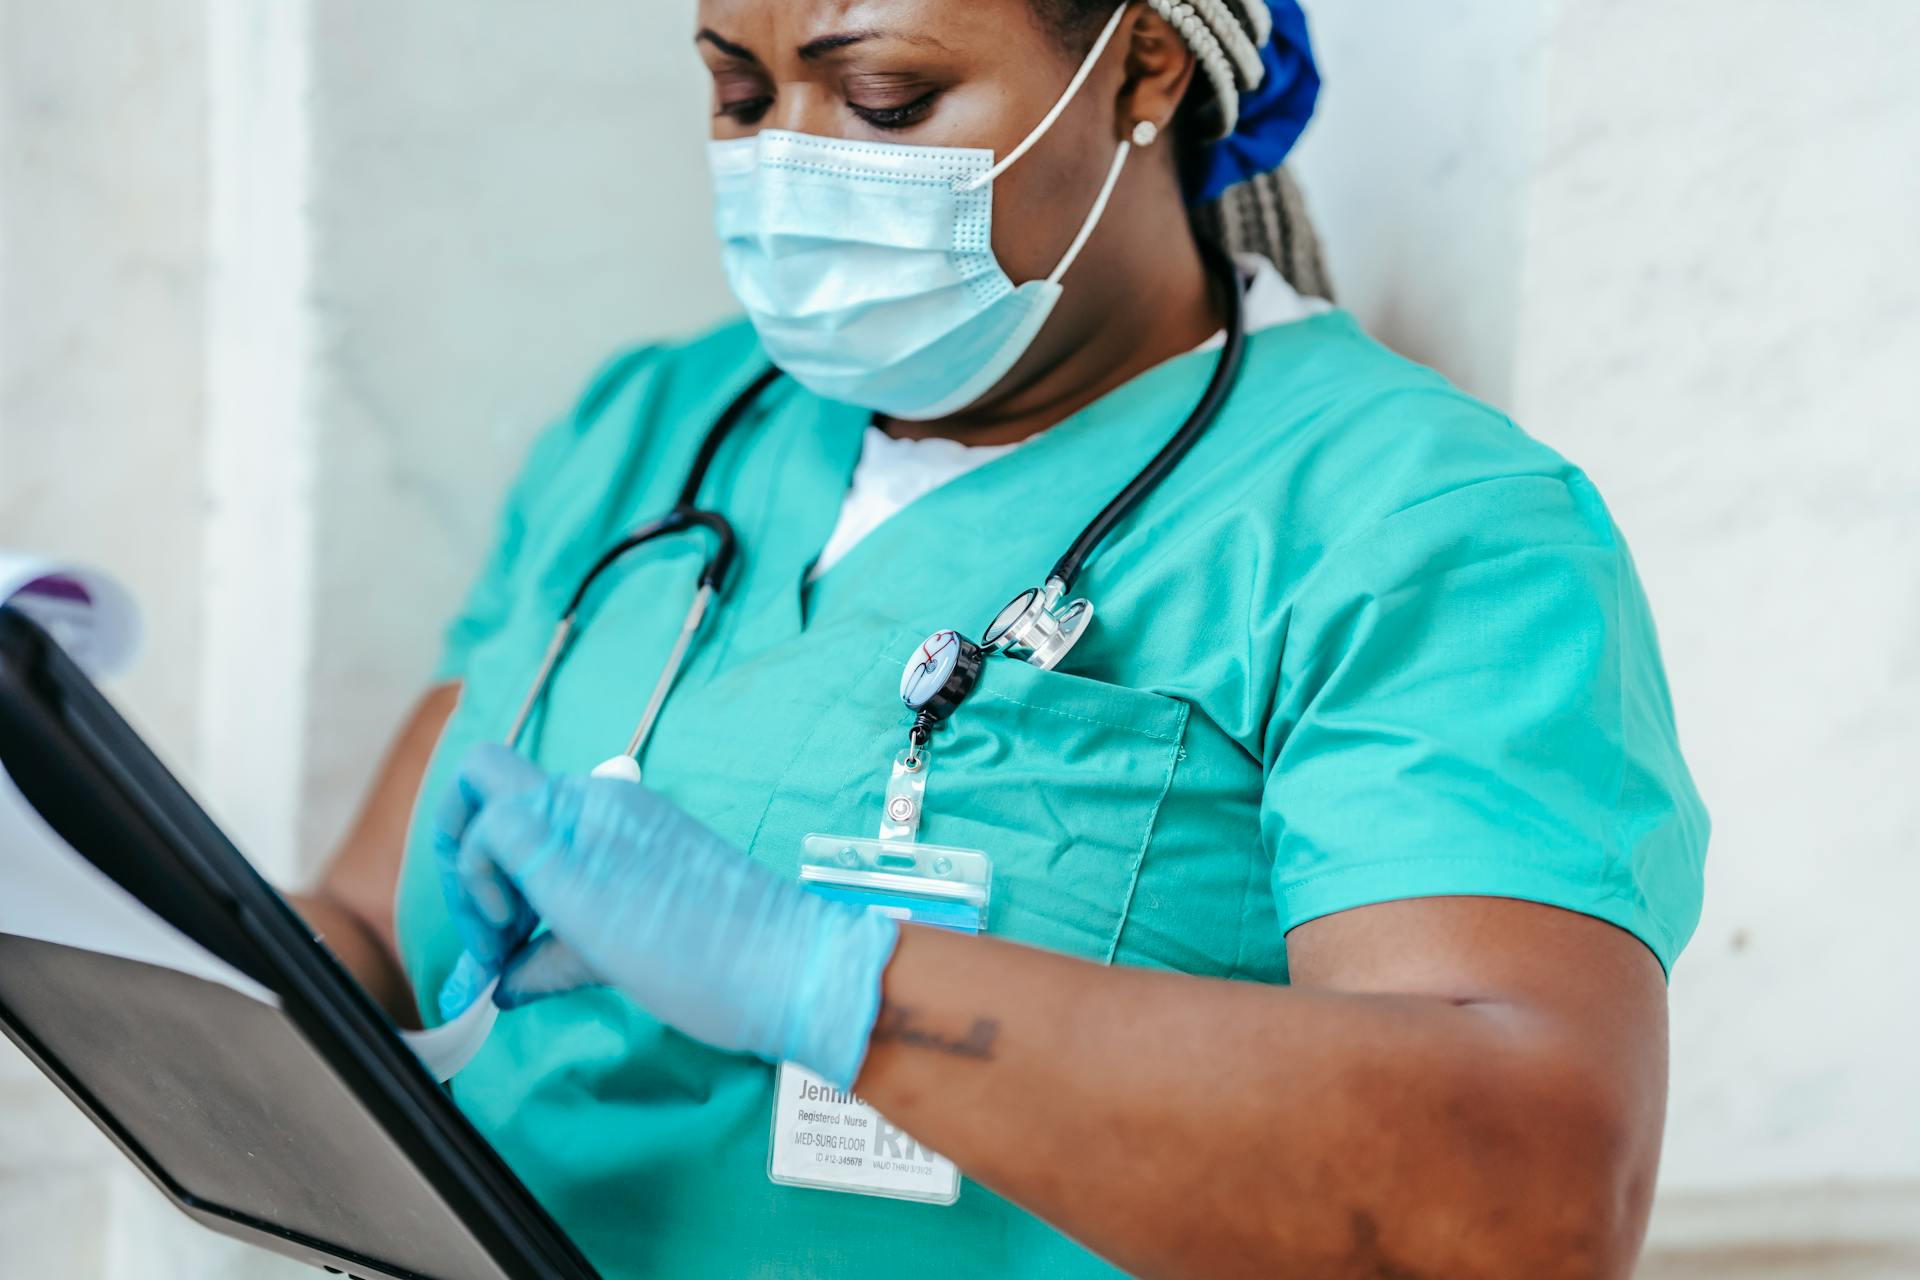 Crop African American woman in uniform standing in hospital and reading patient card while working